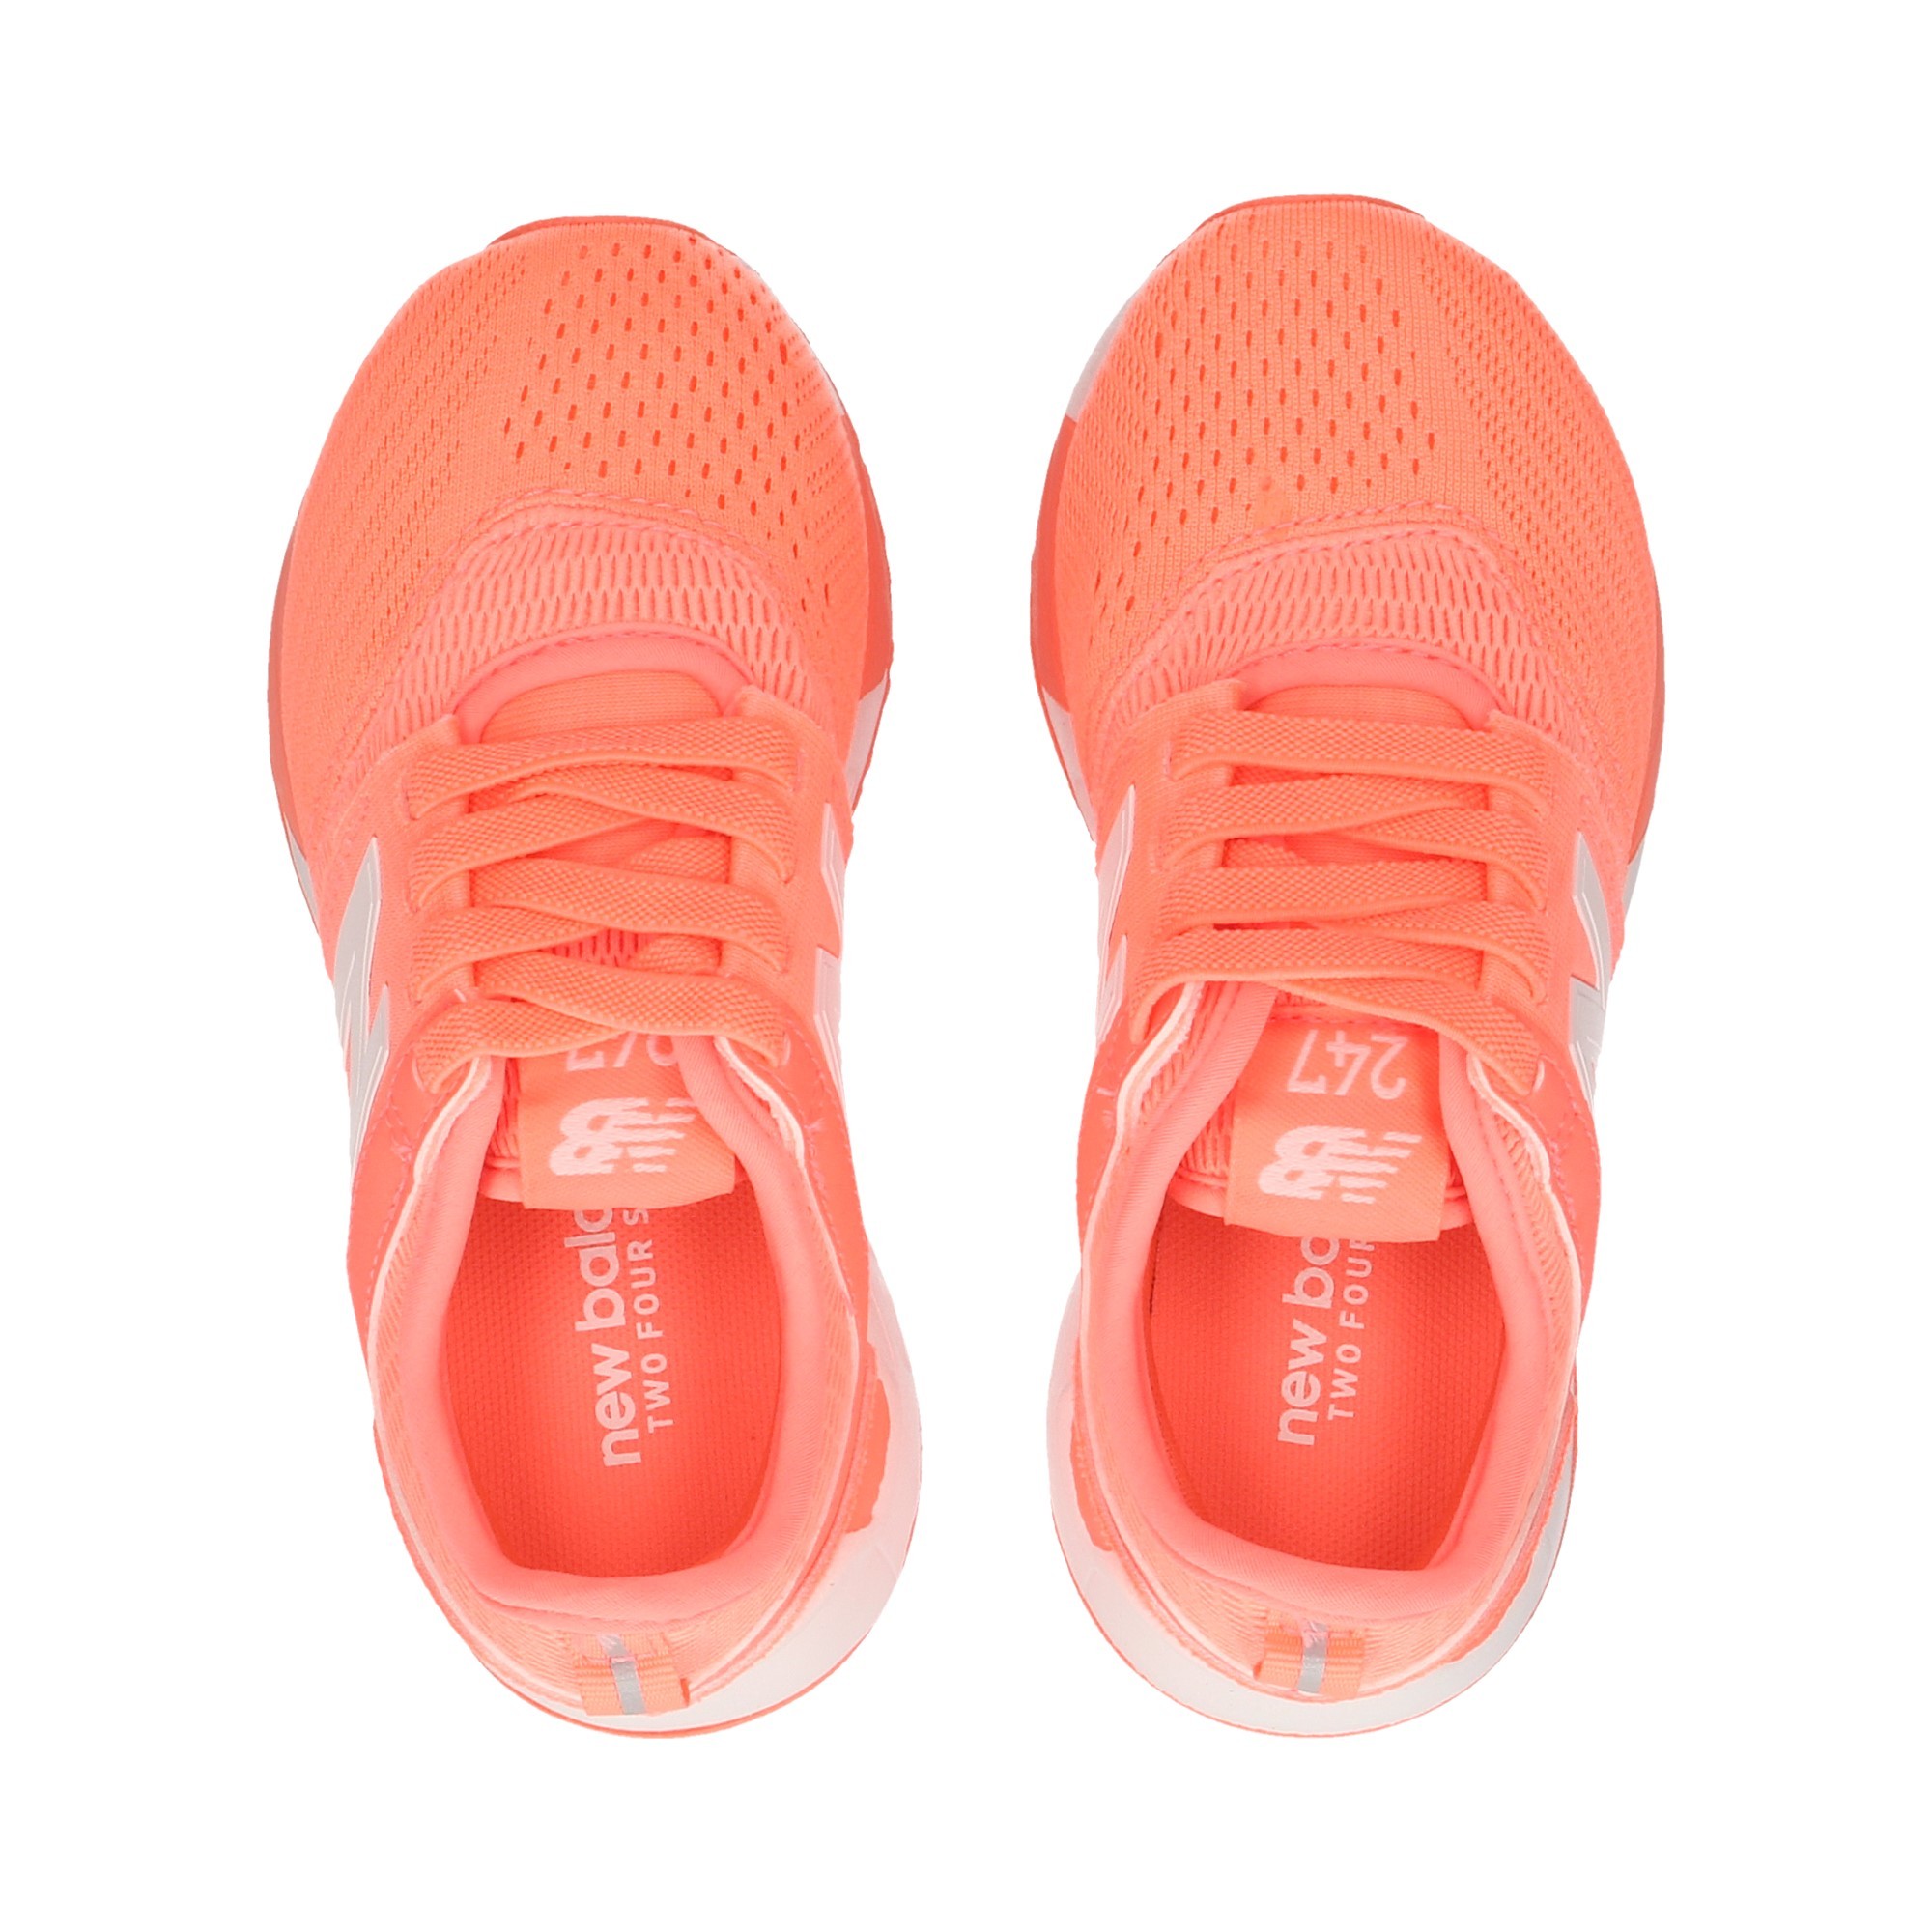 CORAIL SPORTIF / MAILLE BLANCHE